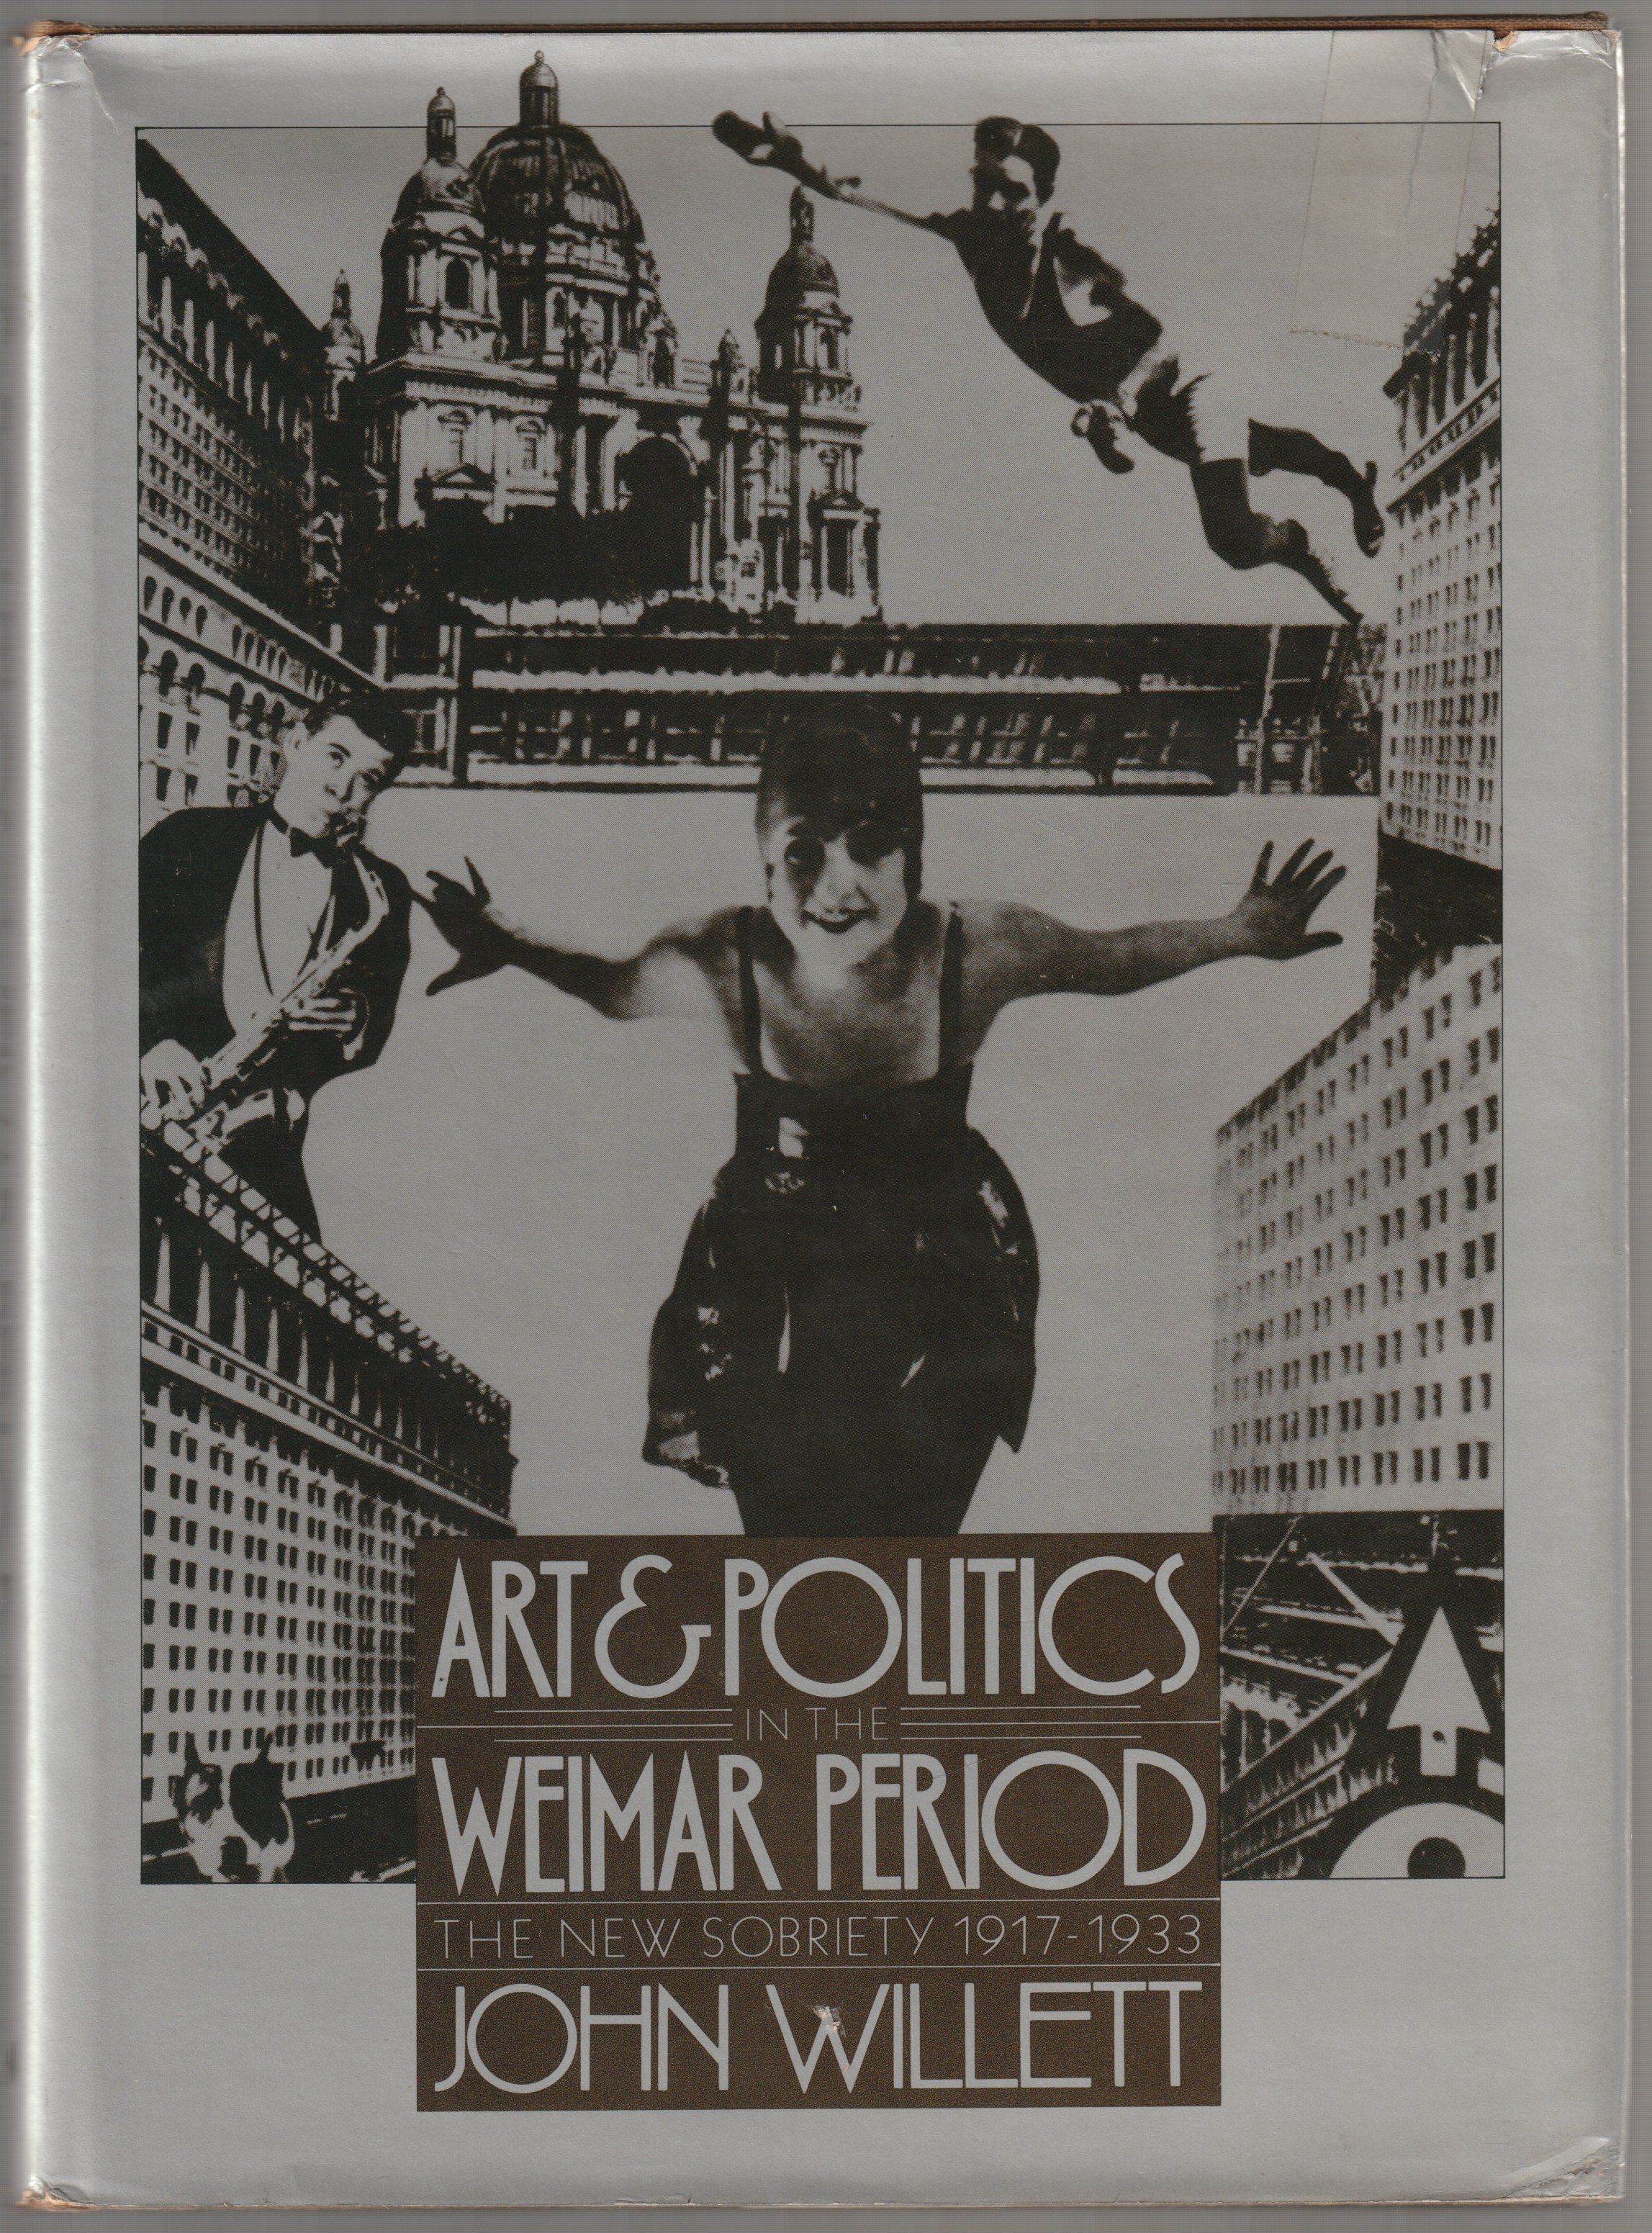 Art and politics in the Weimar period the new sobriety, 1917-1933.